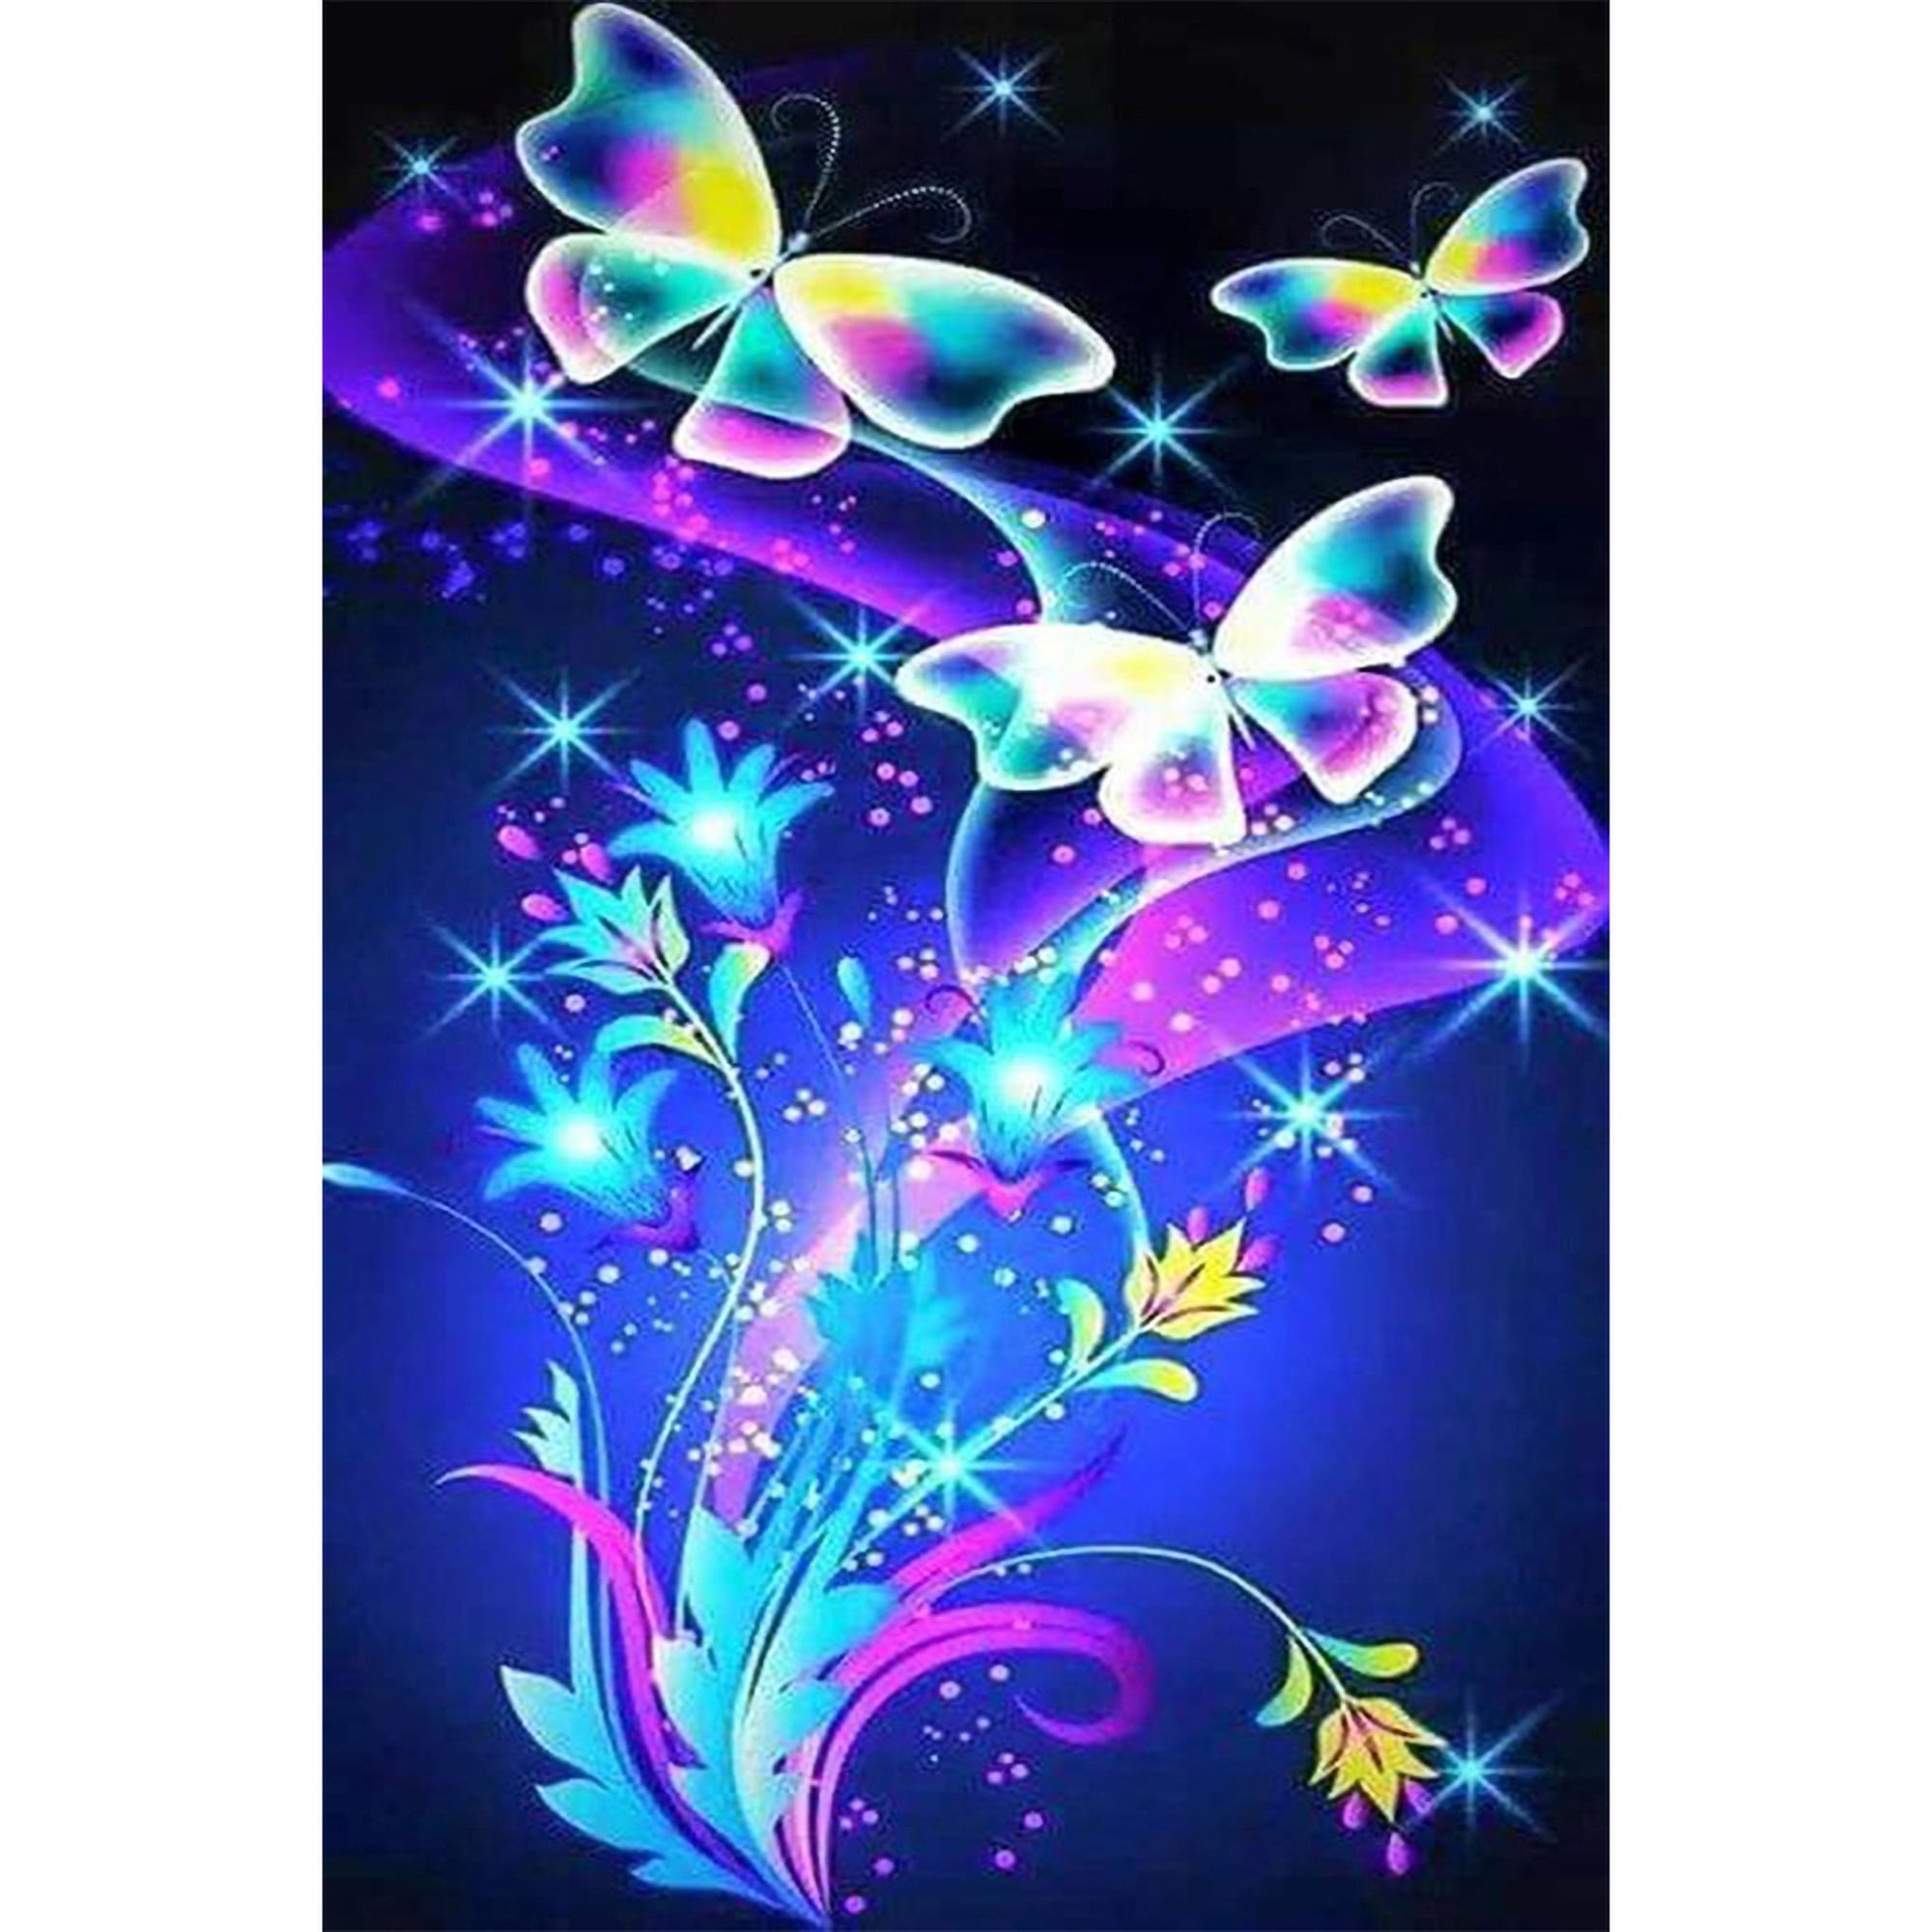 5D Diamond Painting Full Drill Embroidery Cross Stitch Art Craft Butterfly Decor 